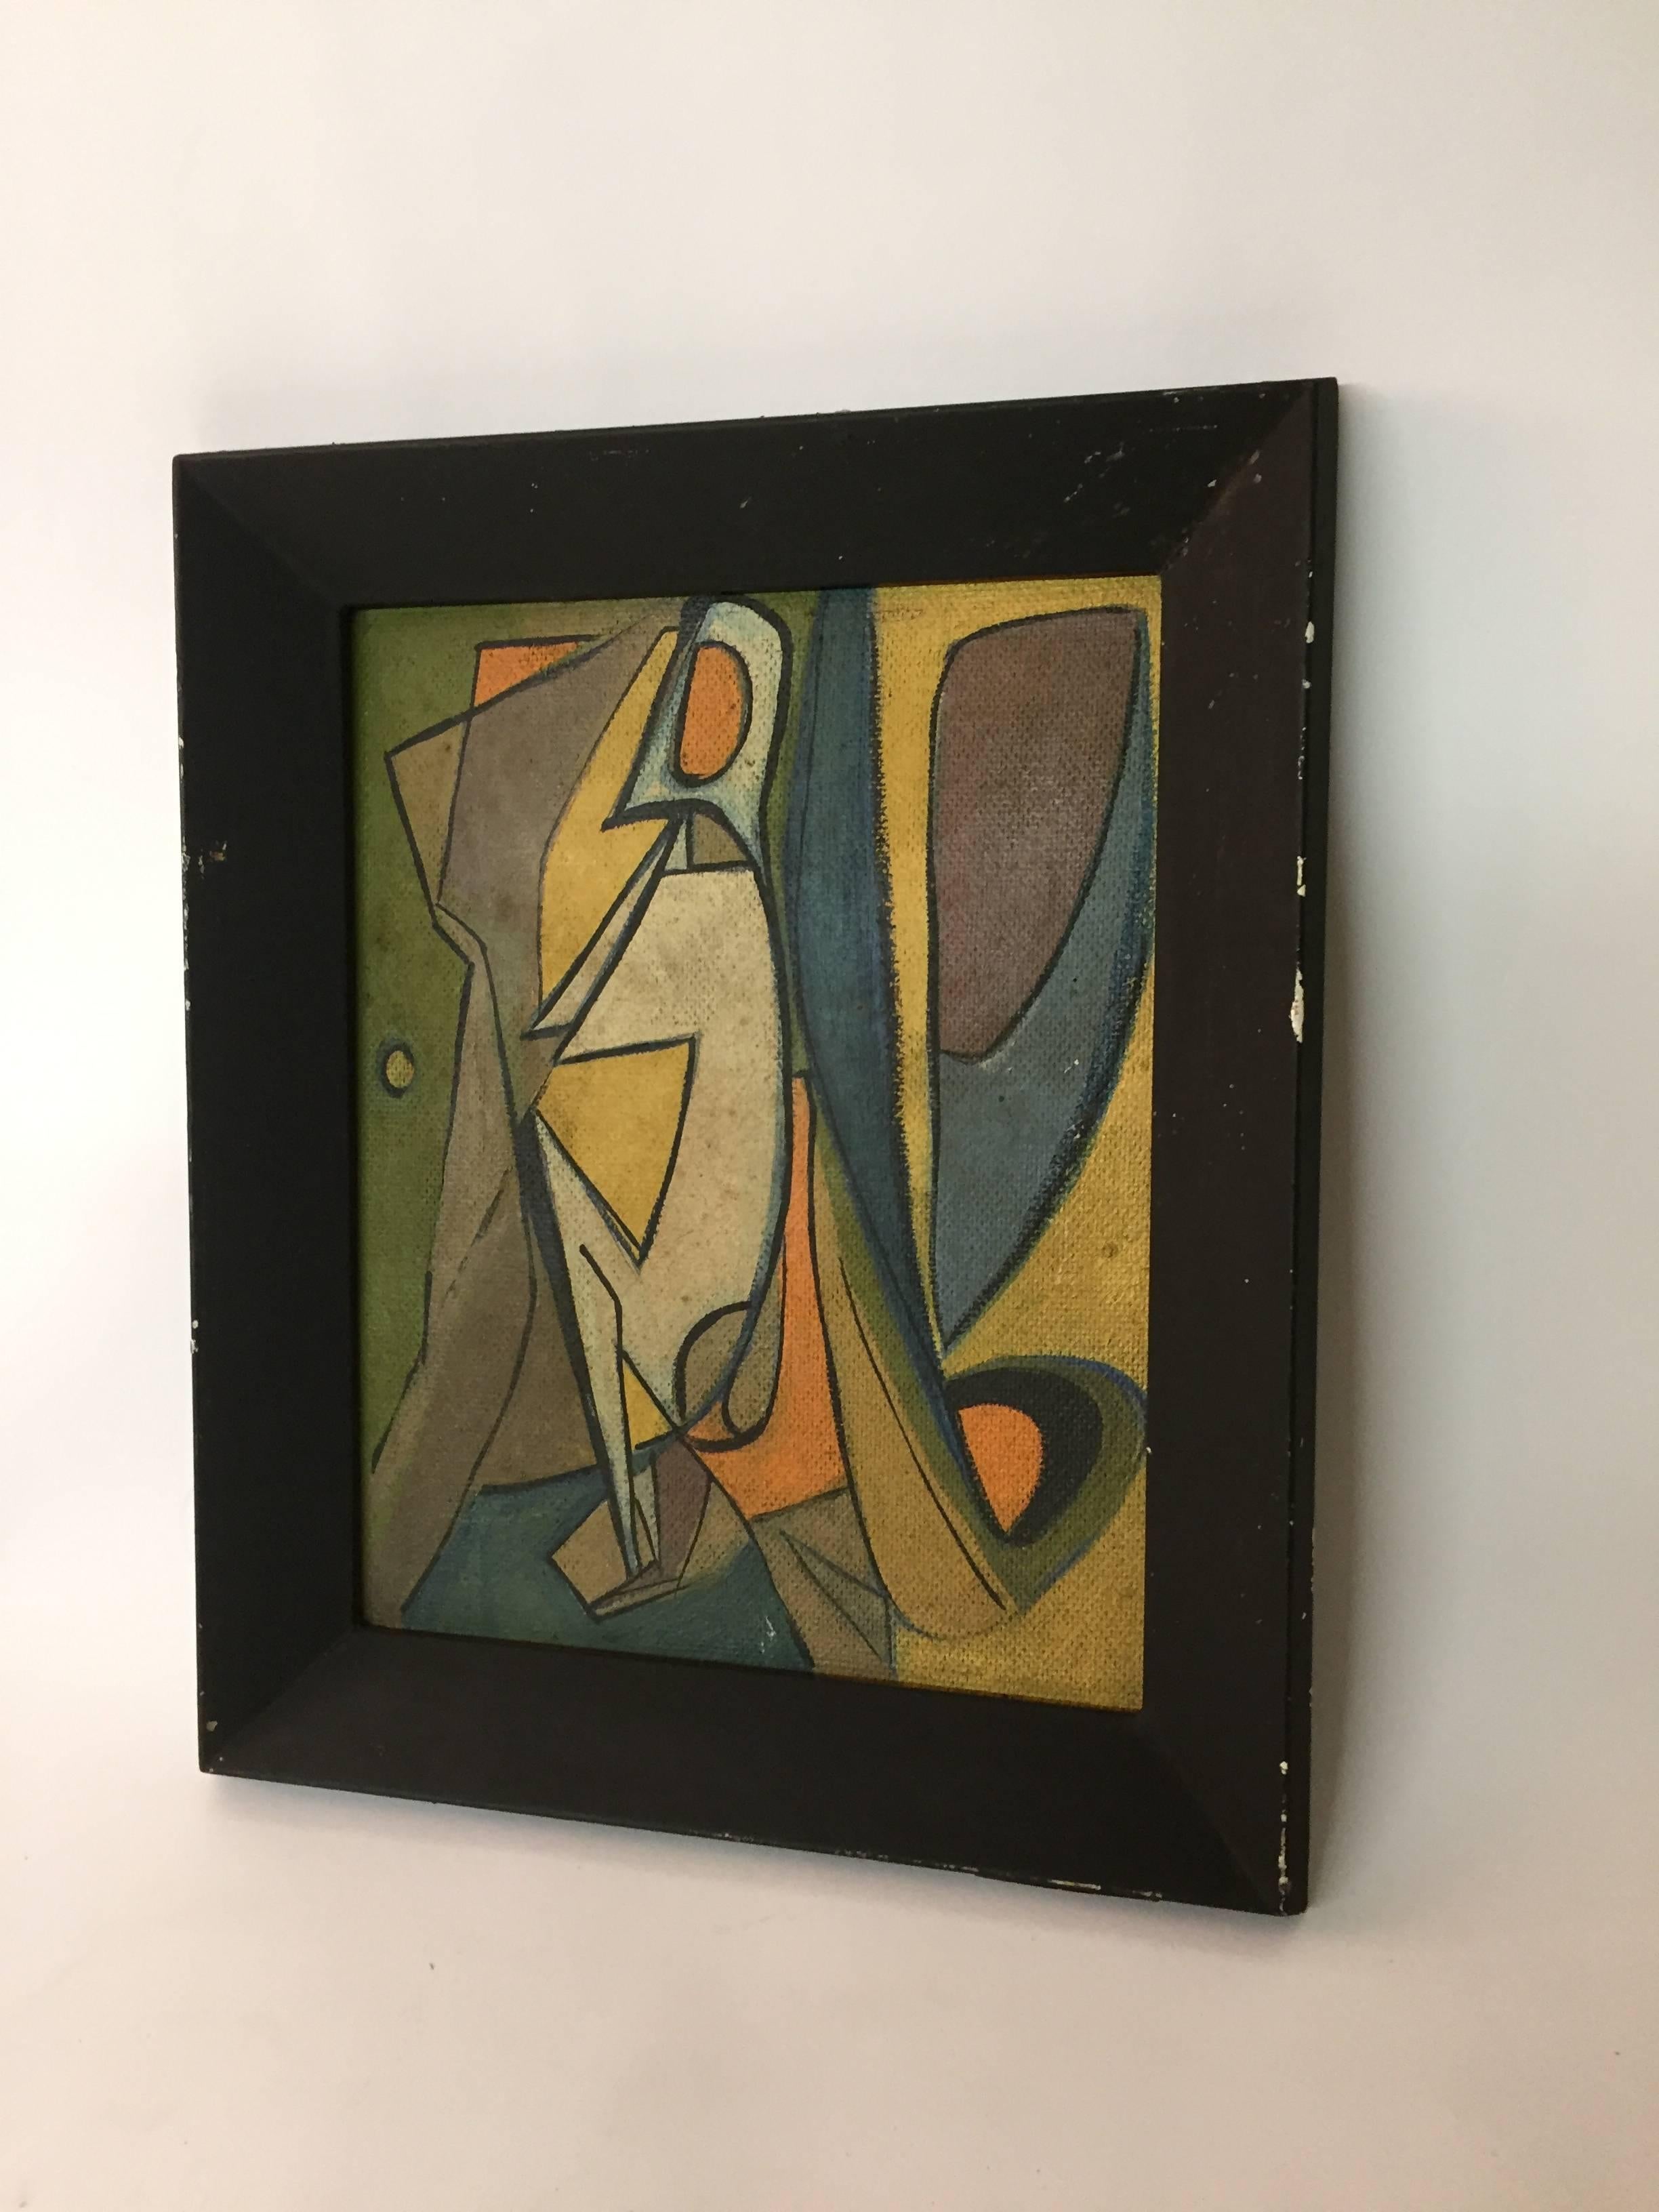 Few words can describe the impact of this powerful painting. Simple yet expressive line and large segments of flat color make this piece. Unsigned. The artist has rendered an abstracted female nude. Oil on masonite board. Overall measurements with